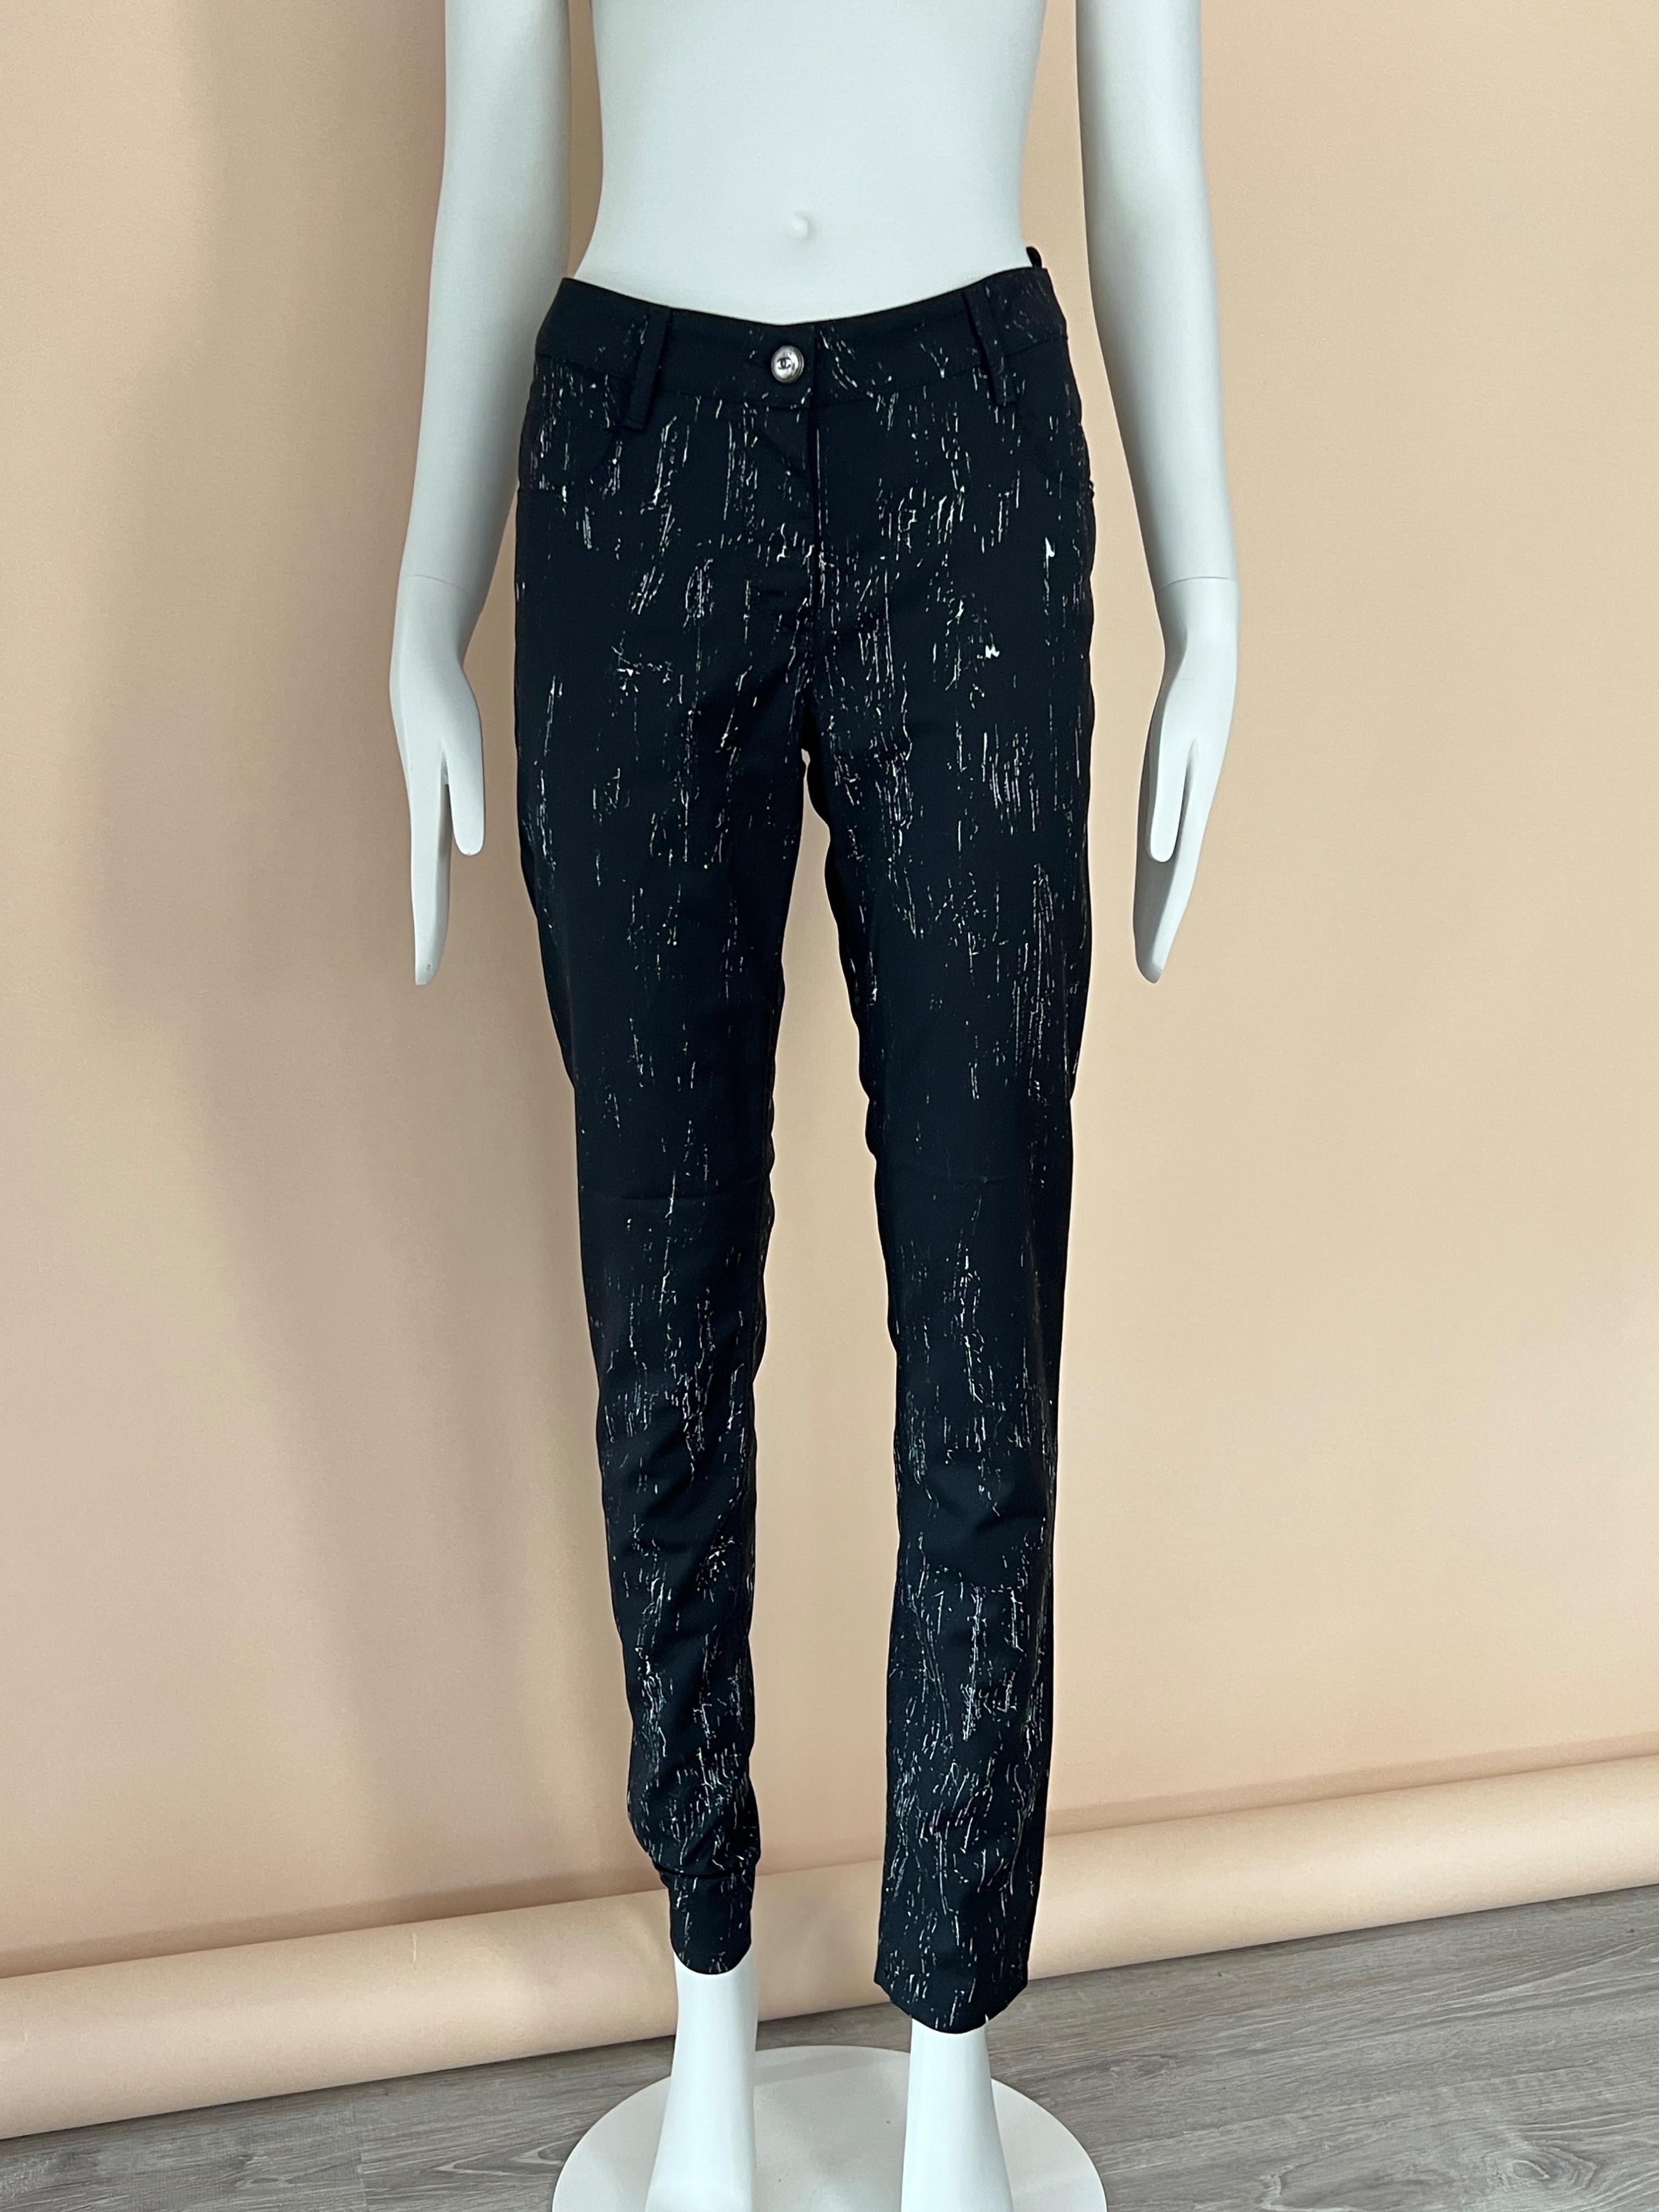 New Chanel black trousers with effect of ''white paint''
CC logo buttons and zipper at front, CC studs at pockets.
Size mark 38 fr.
Never Worn.